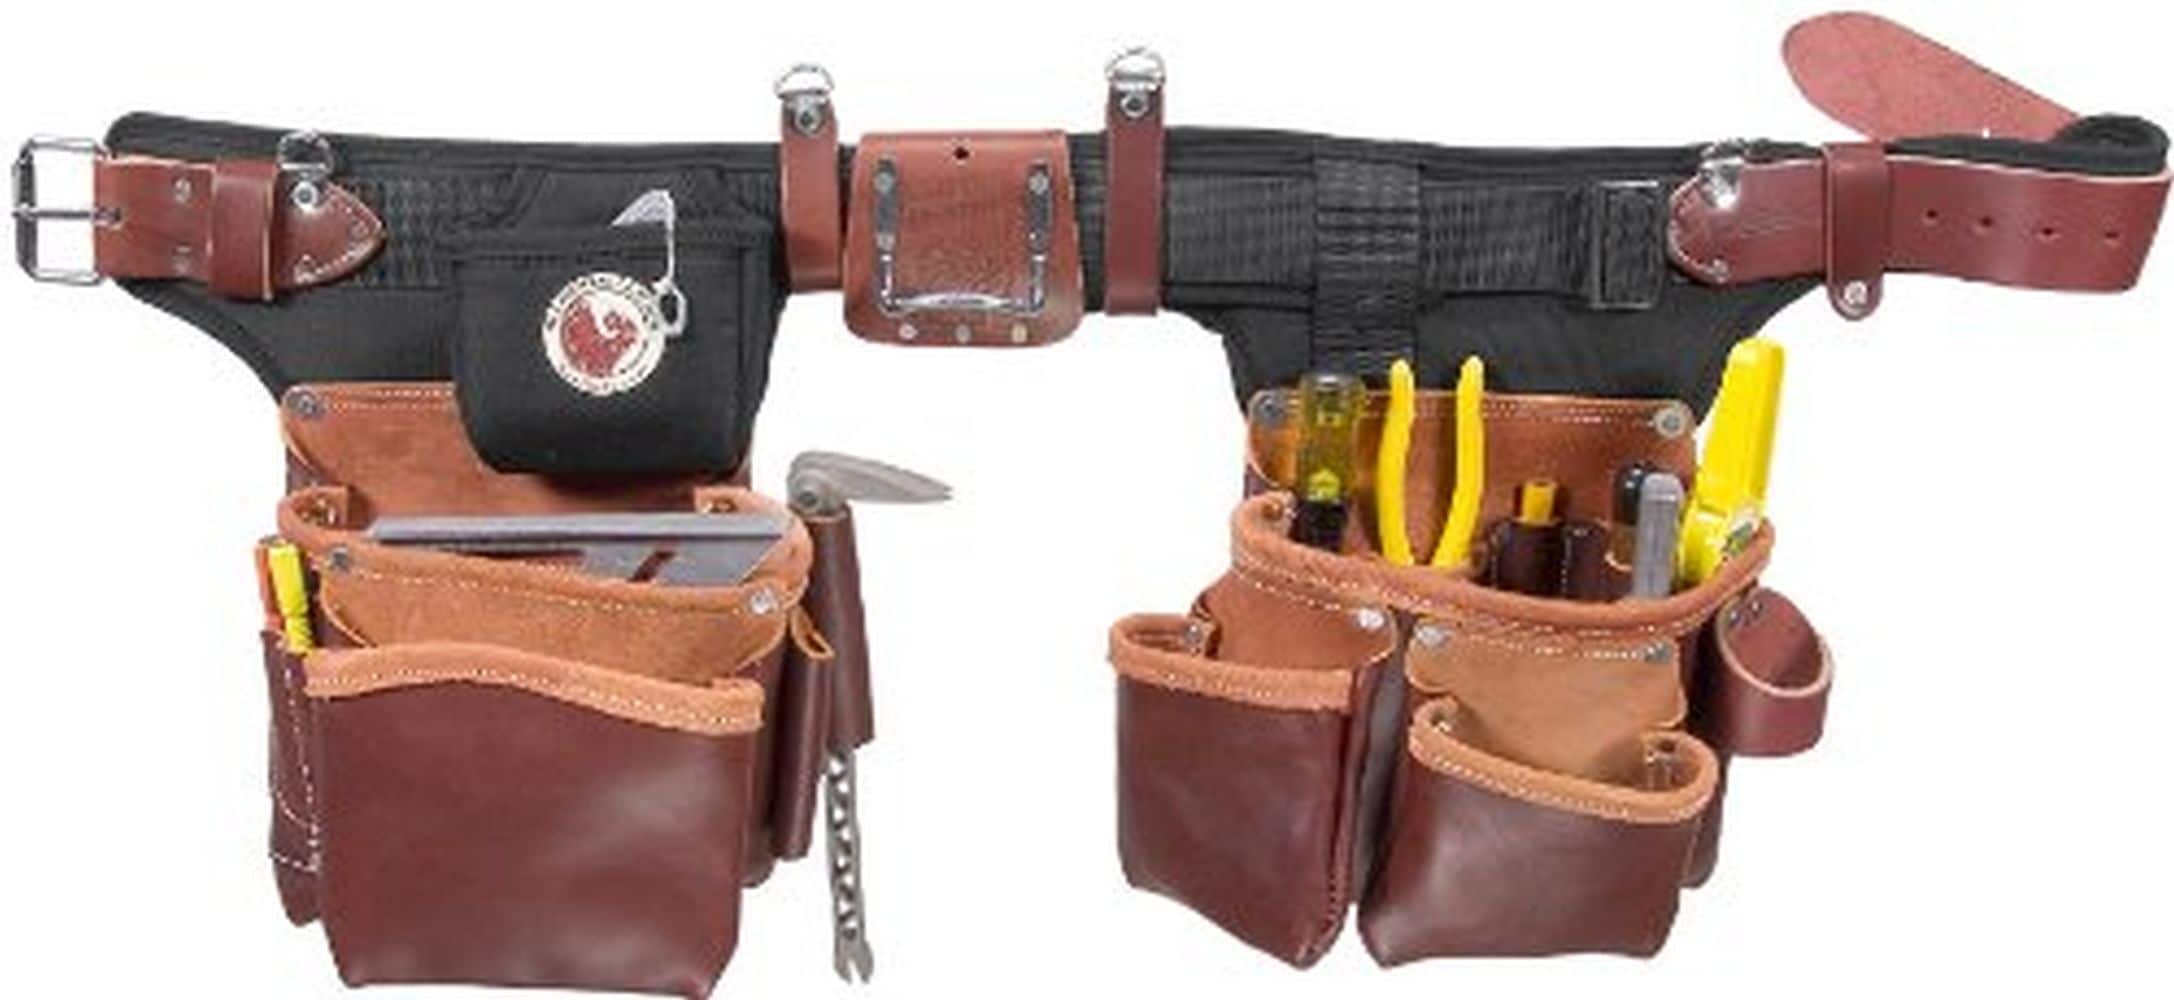 Occidental Leather Tool Belts at Lowes.com